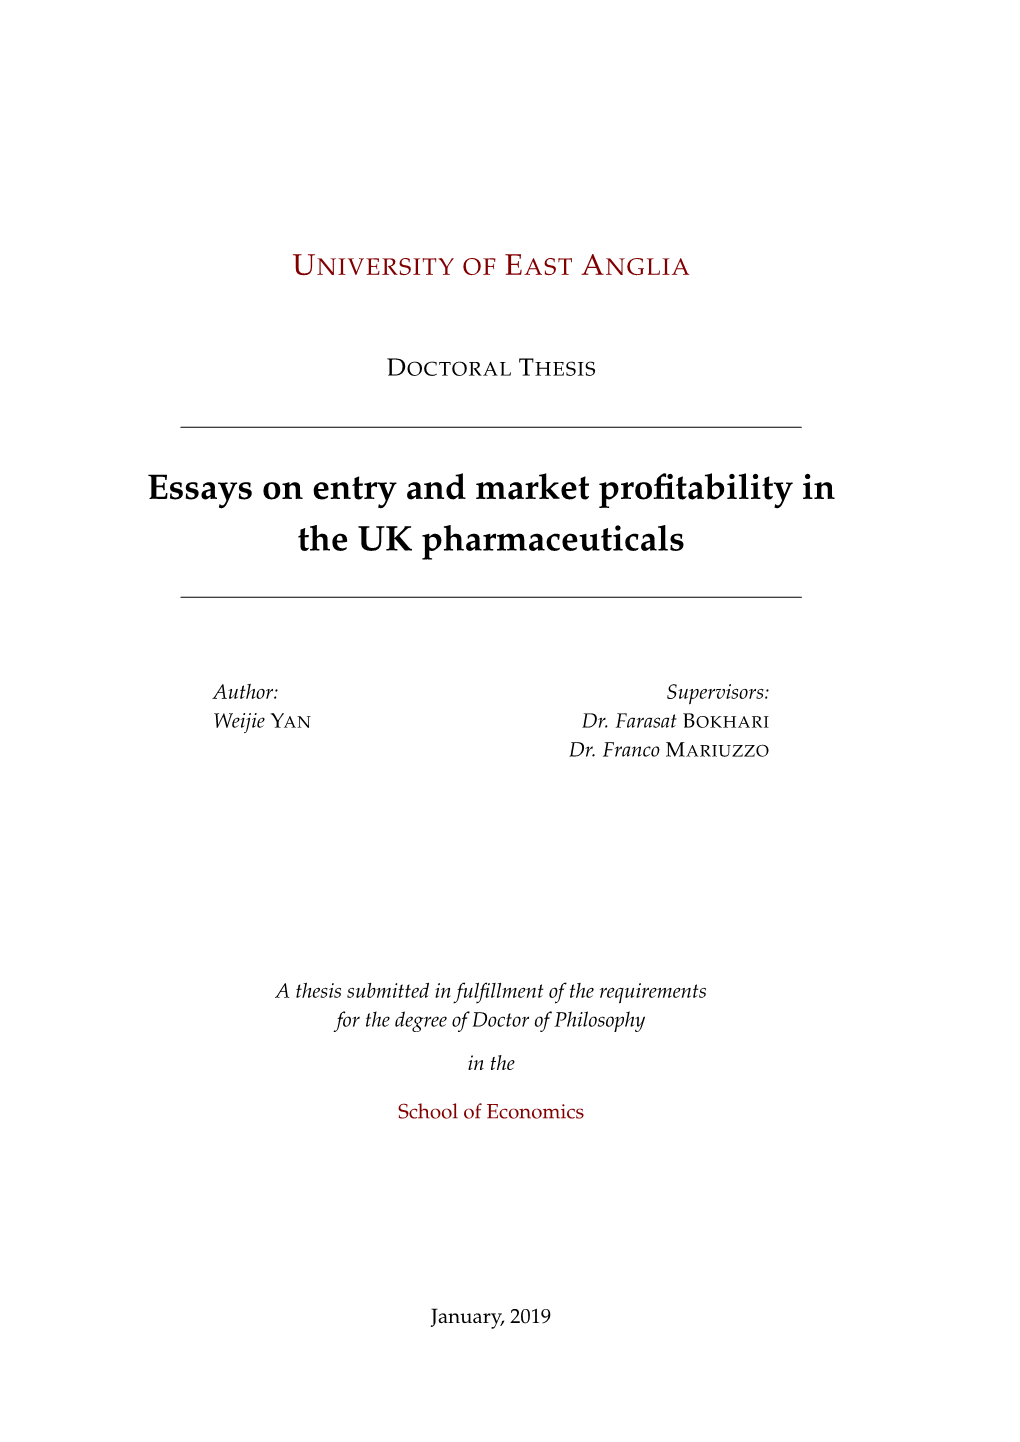 Essays on Entry and Market Profitability in the UK Pharmaceuticals